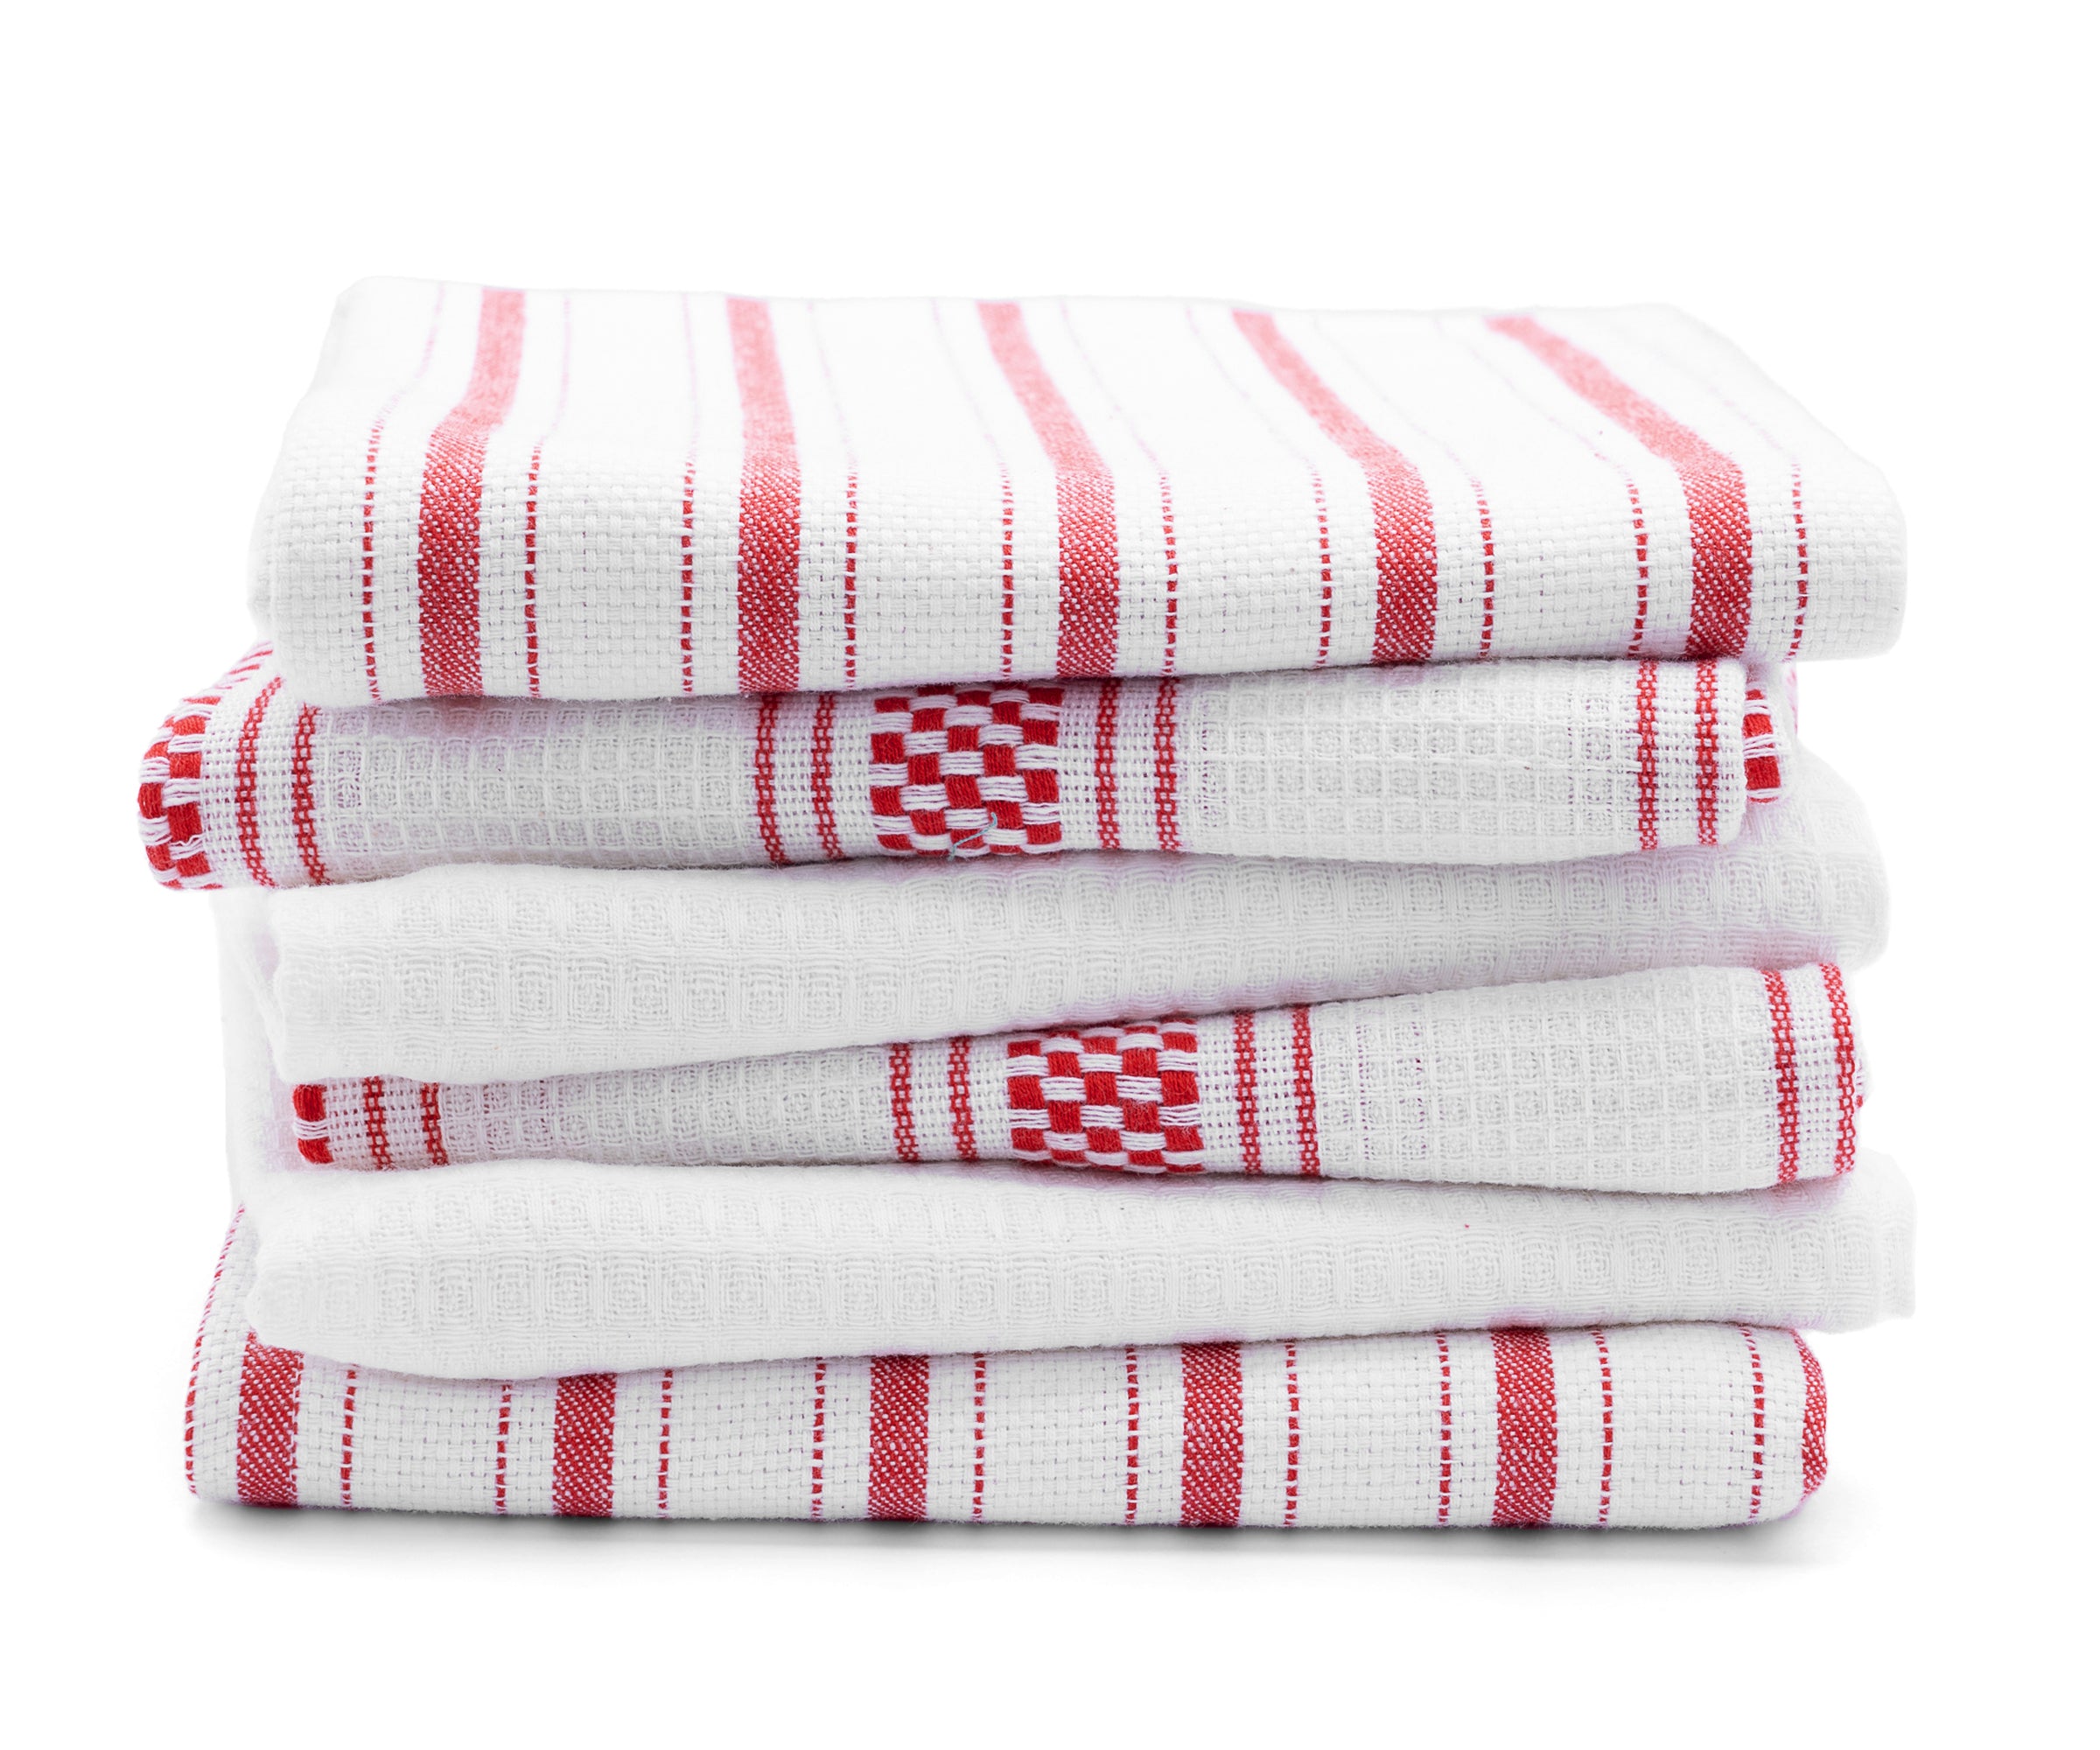 Red Kitchen Dish Towels Set of 4, Cotton Dish Towels, French Striped Dish Towels, Tea Dish Towels, Bar Towels for Kitchen, Linen Towels, Farmhouse